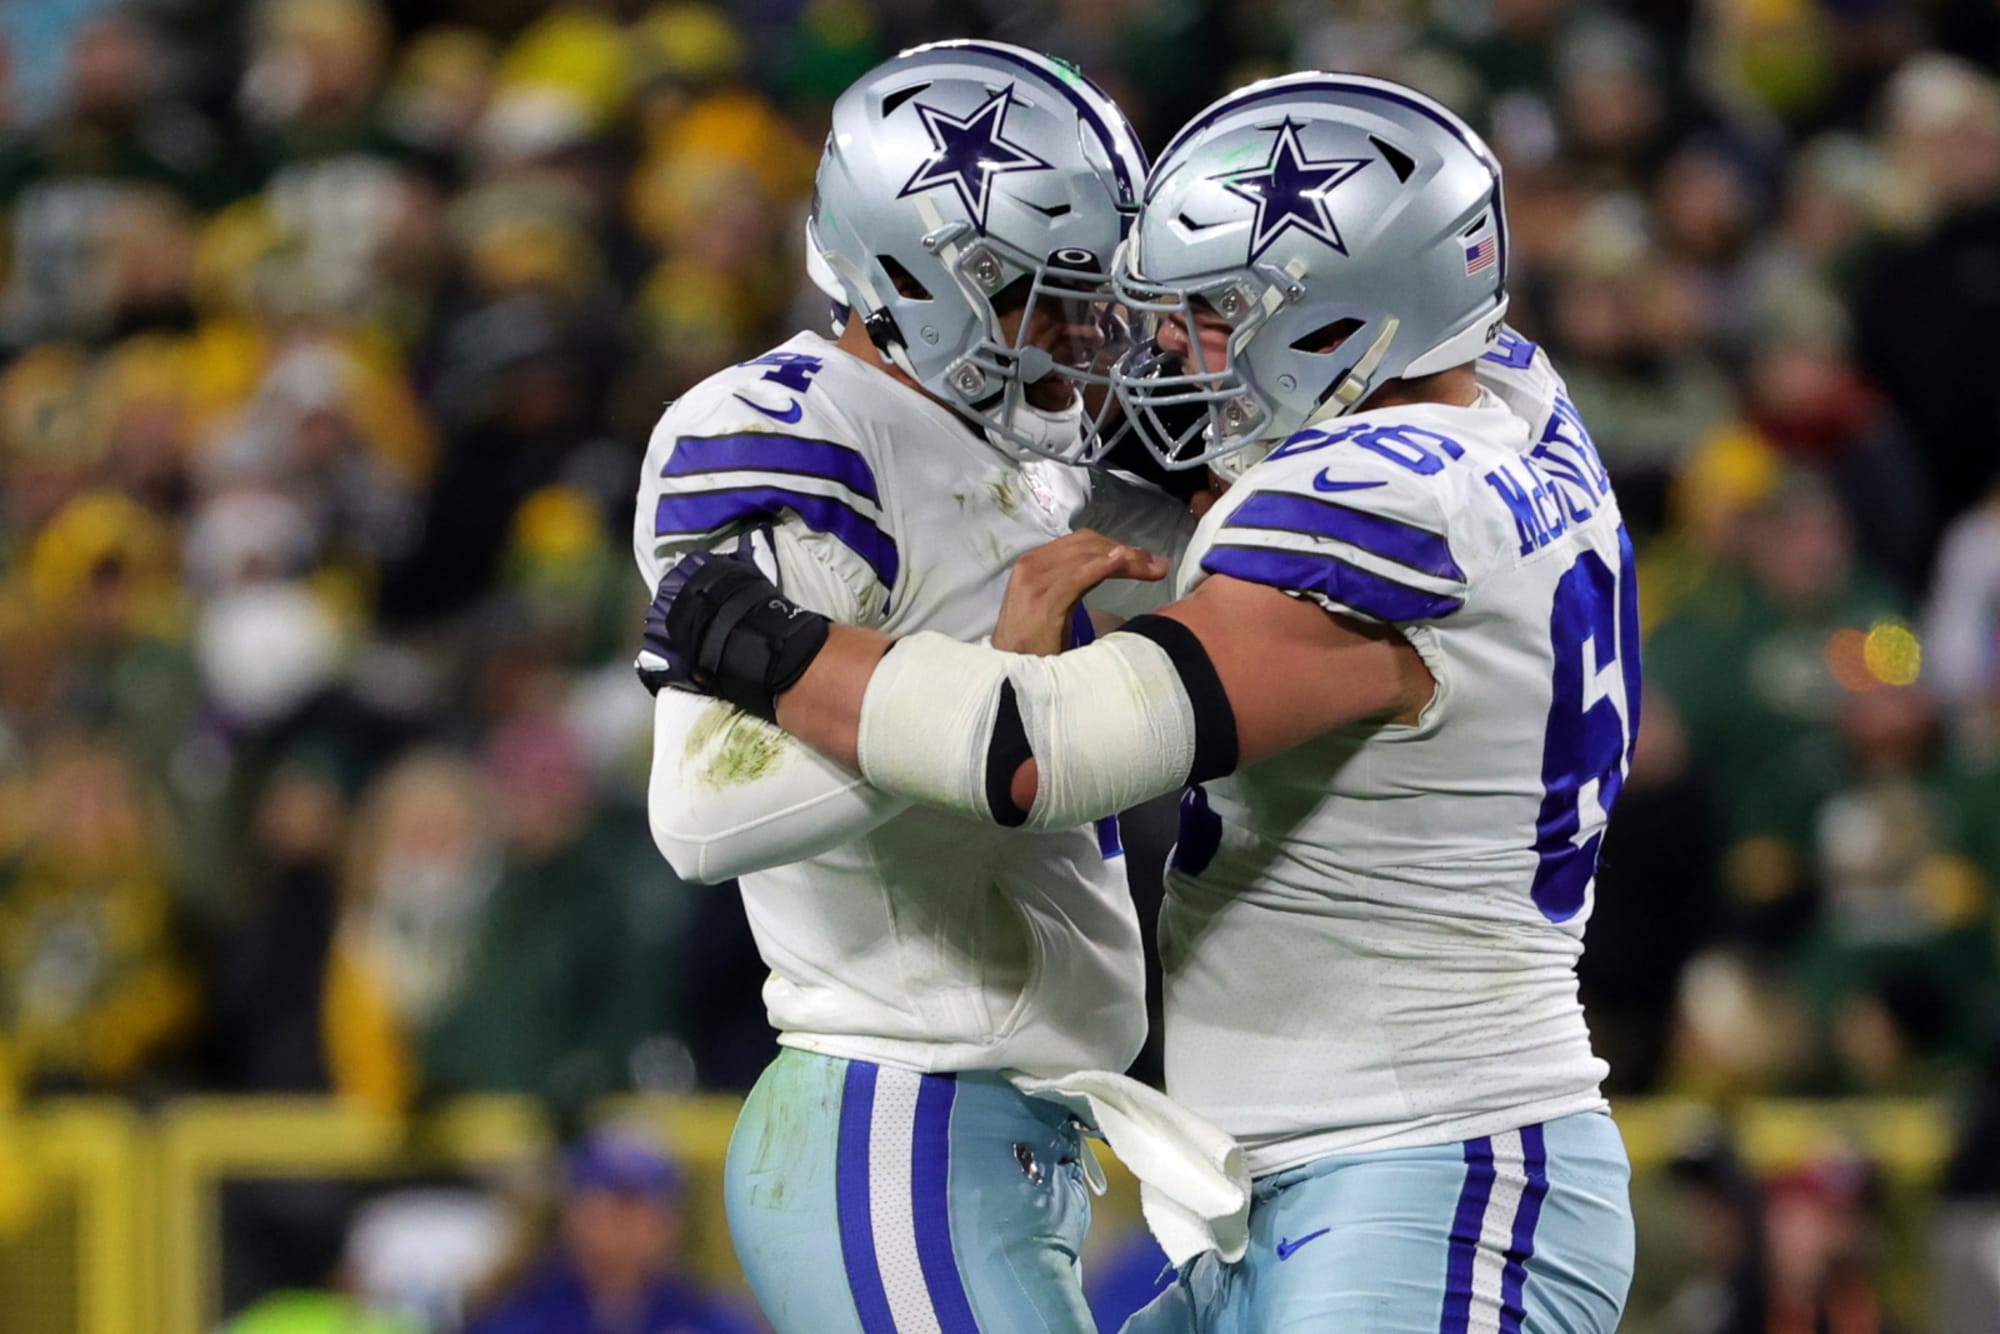 Cowboys OL echoes fans that refs screwed team vs Packers